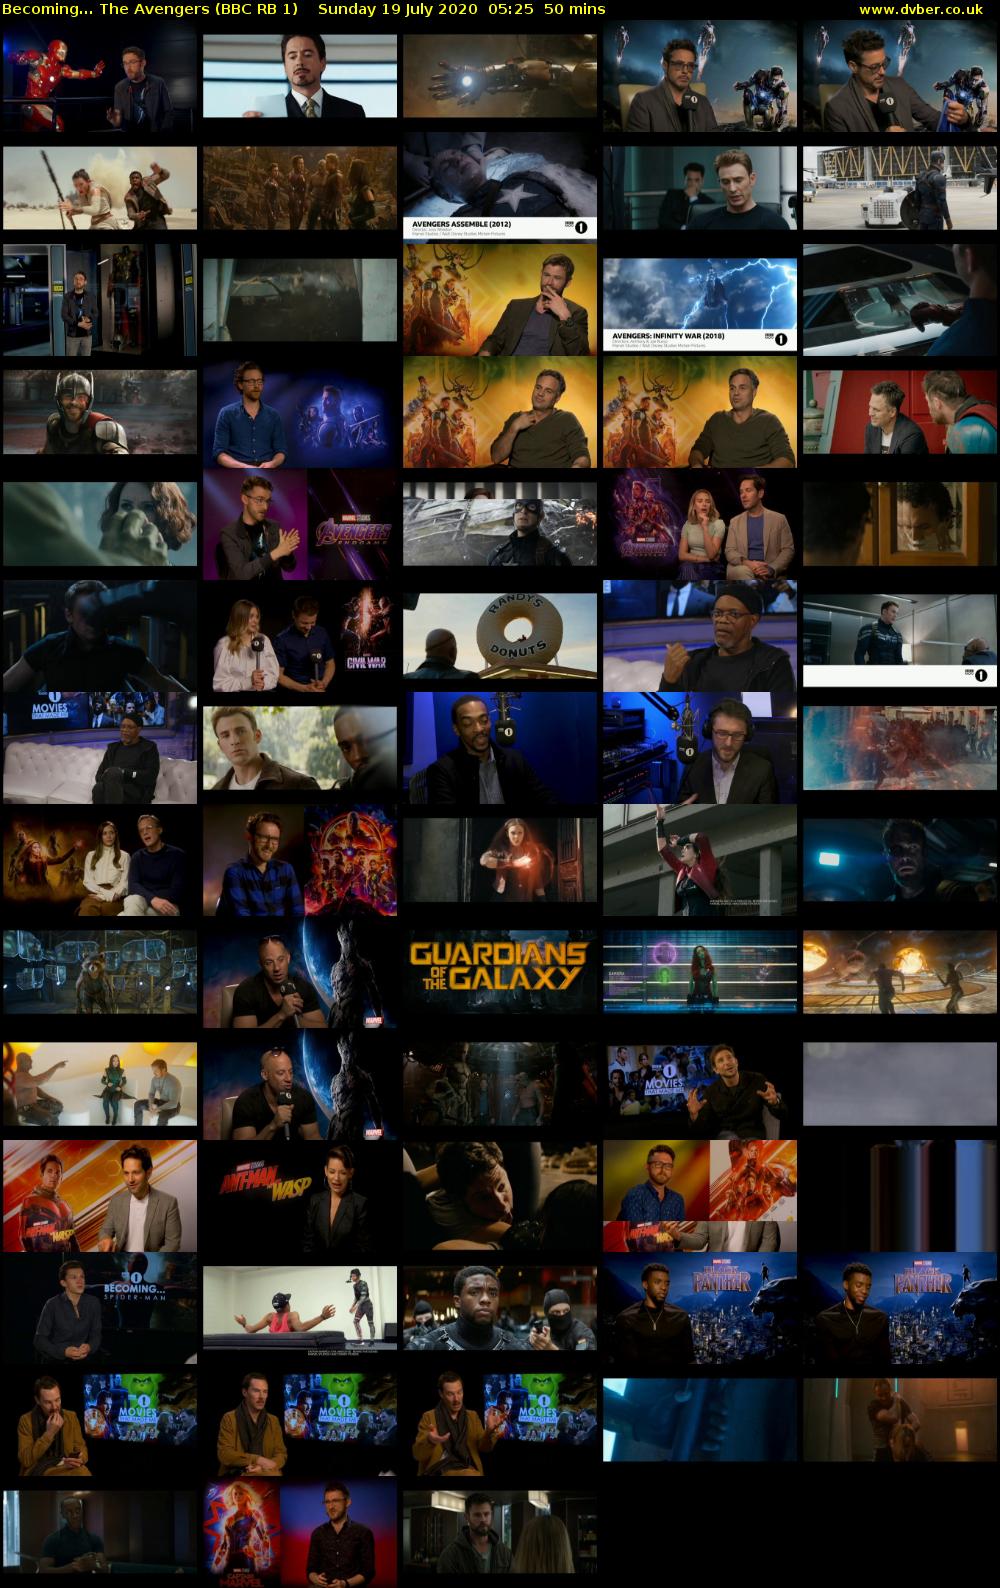 Becoming... The Avengers (BBC RB 1) Sunday 19 July 2020 05:25 - 06:15